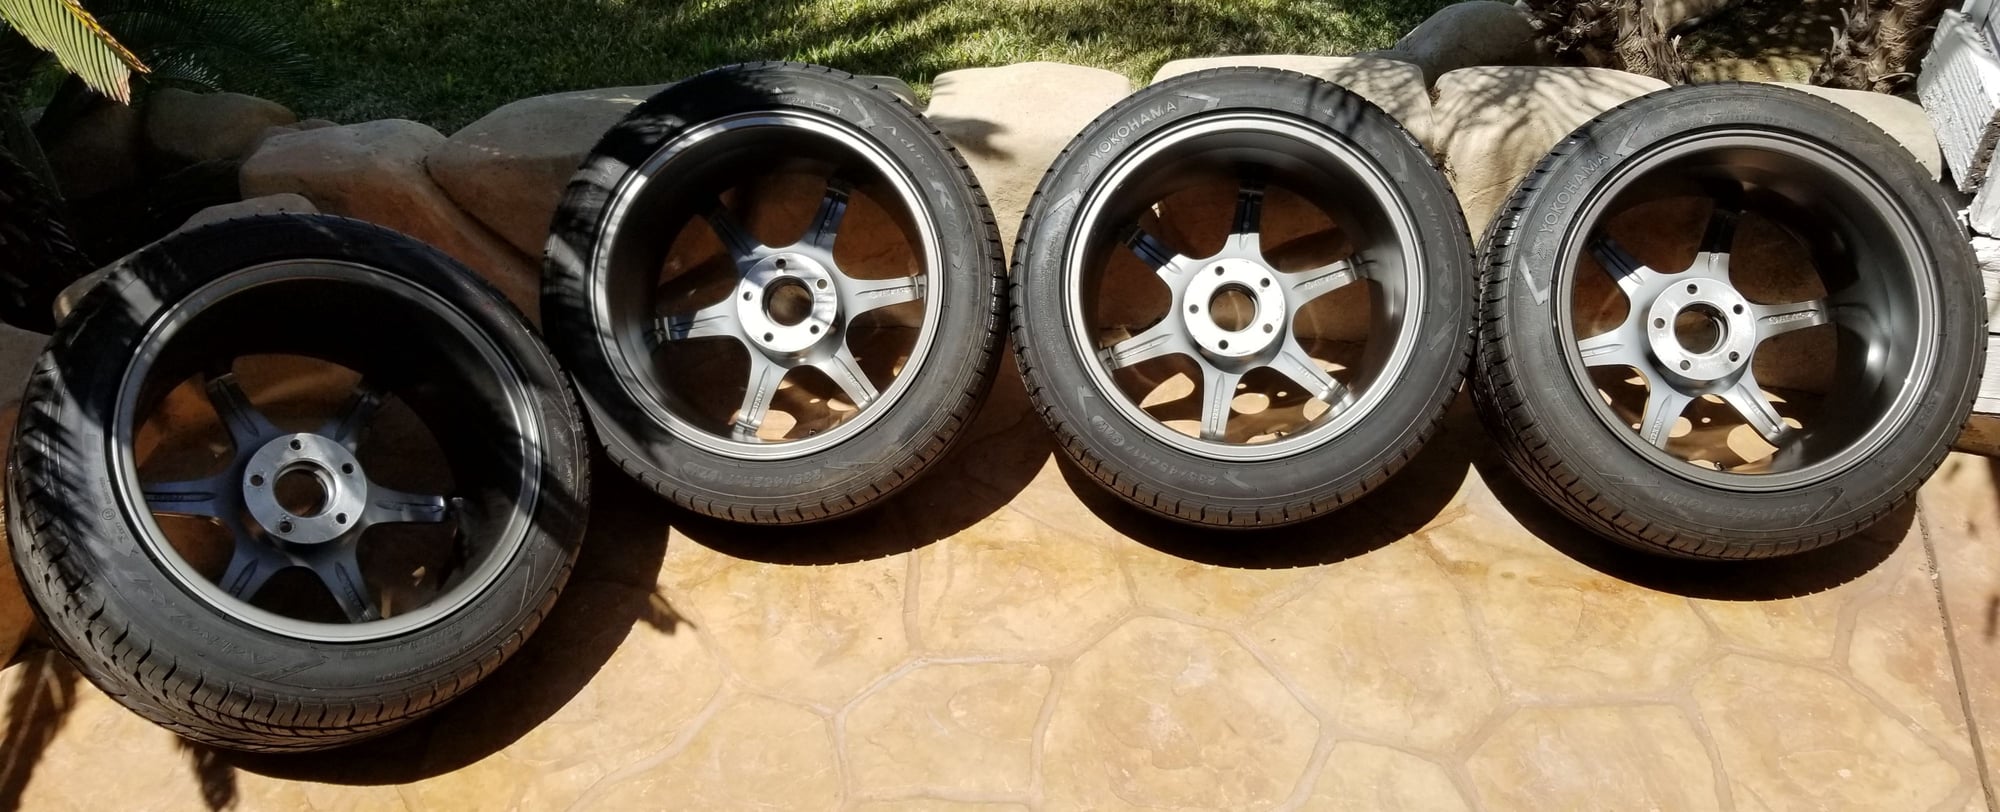 Wheels and Tires/Axles - G.MAX Drift 6 Wheels & Tires Brand New - New - 1998 to 2005 Lexus GS300 - 1998 to 2000 Lexus GS400 - 2001 to 2005 Lexus GS430 - 2001 to 2005 Lexus IS300 - 1993 to 1997 Lexus GS300 - 1990 to 2000 Lexus LS400 - 1991 to 2001 Lexus ES300 - San Marcos, CA 92078, United States